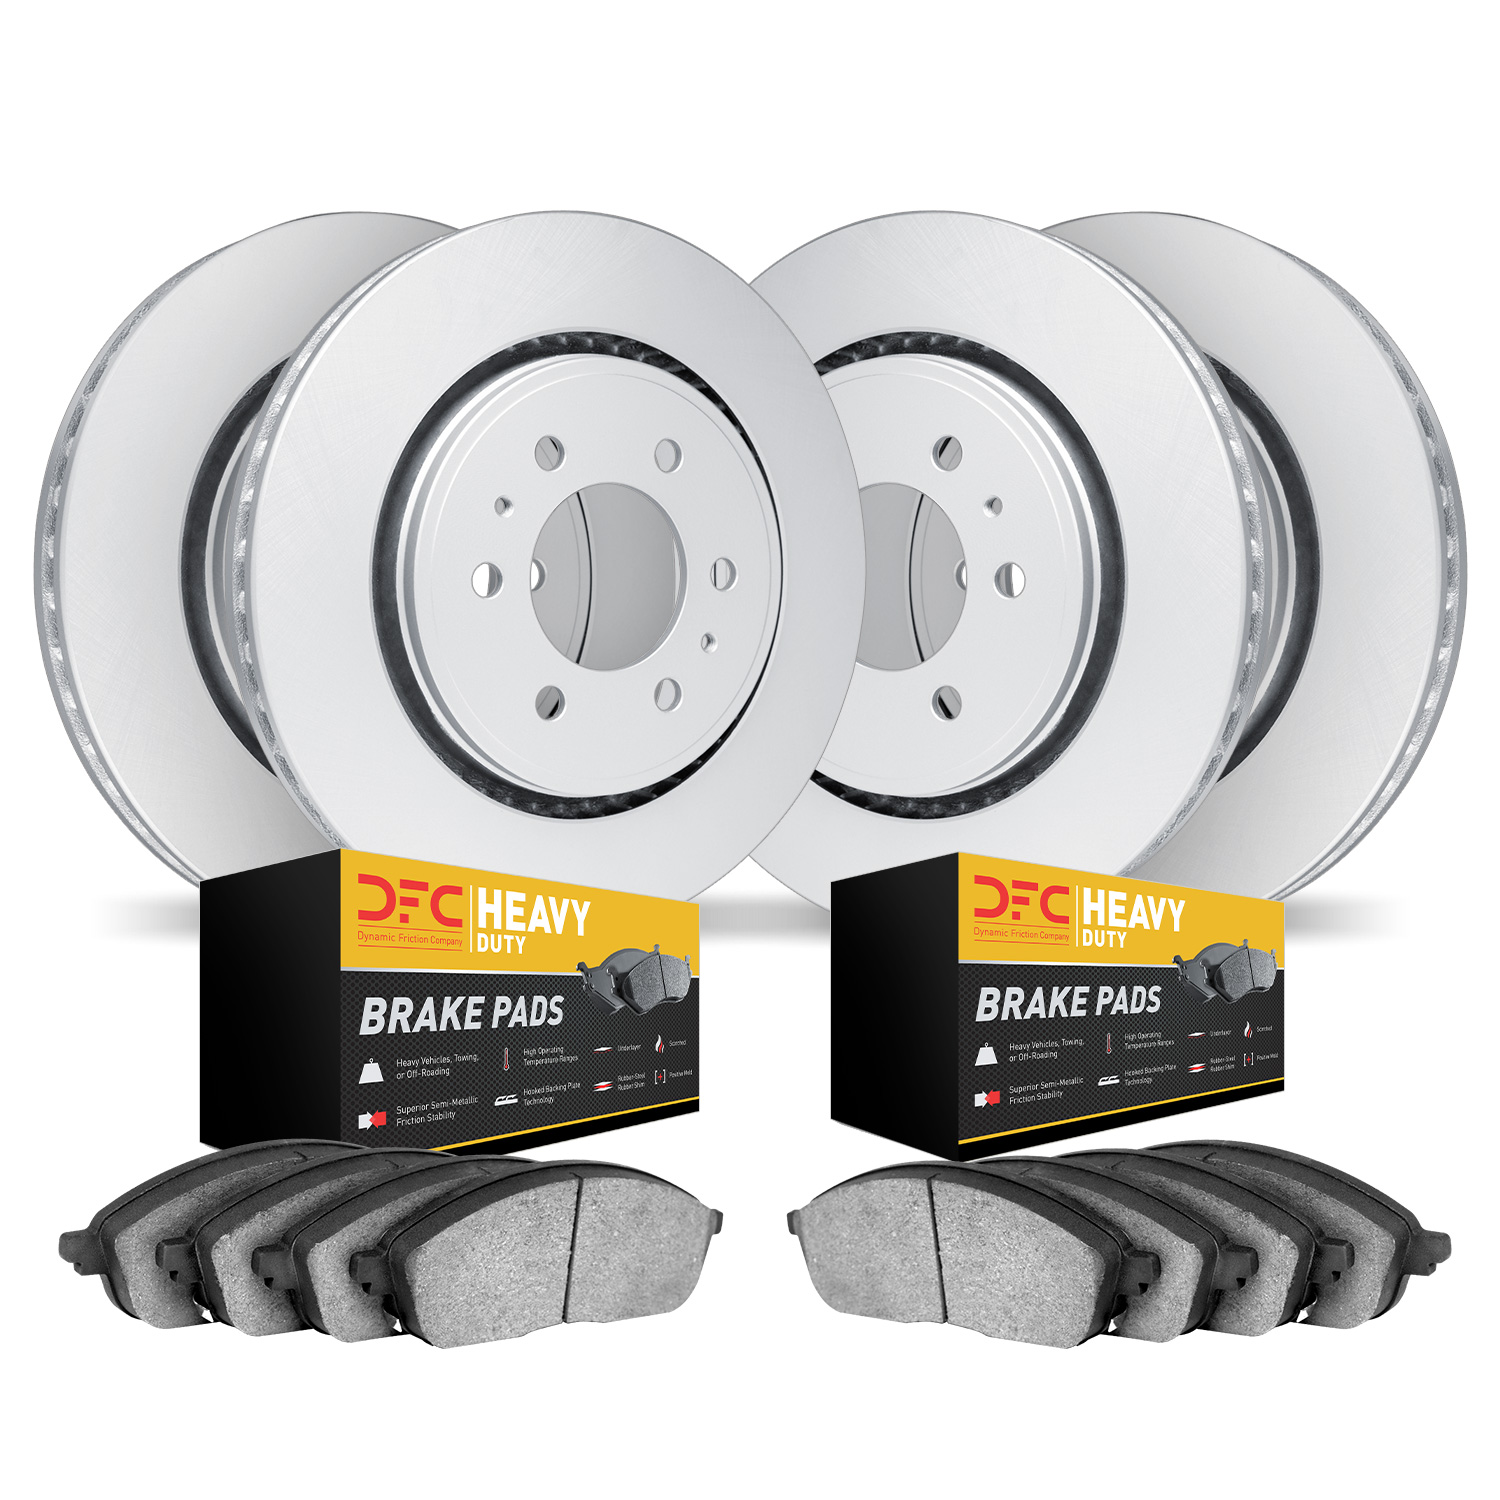 4204-54040 Geospec Brake Rotors w/Heavy-Duty Brake Pads Kit, 2009-2009 Ford/Lincoln/Mercury/Mazda, Position: Front and Rear